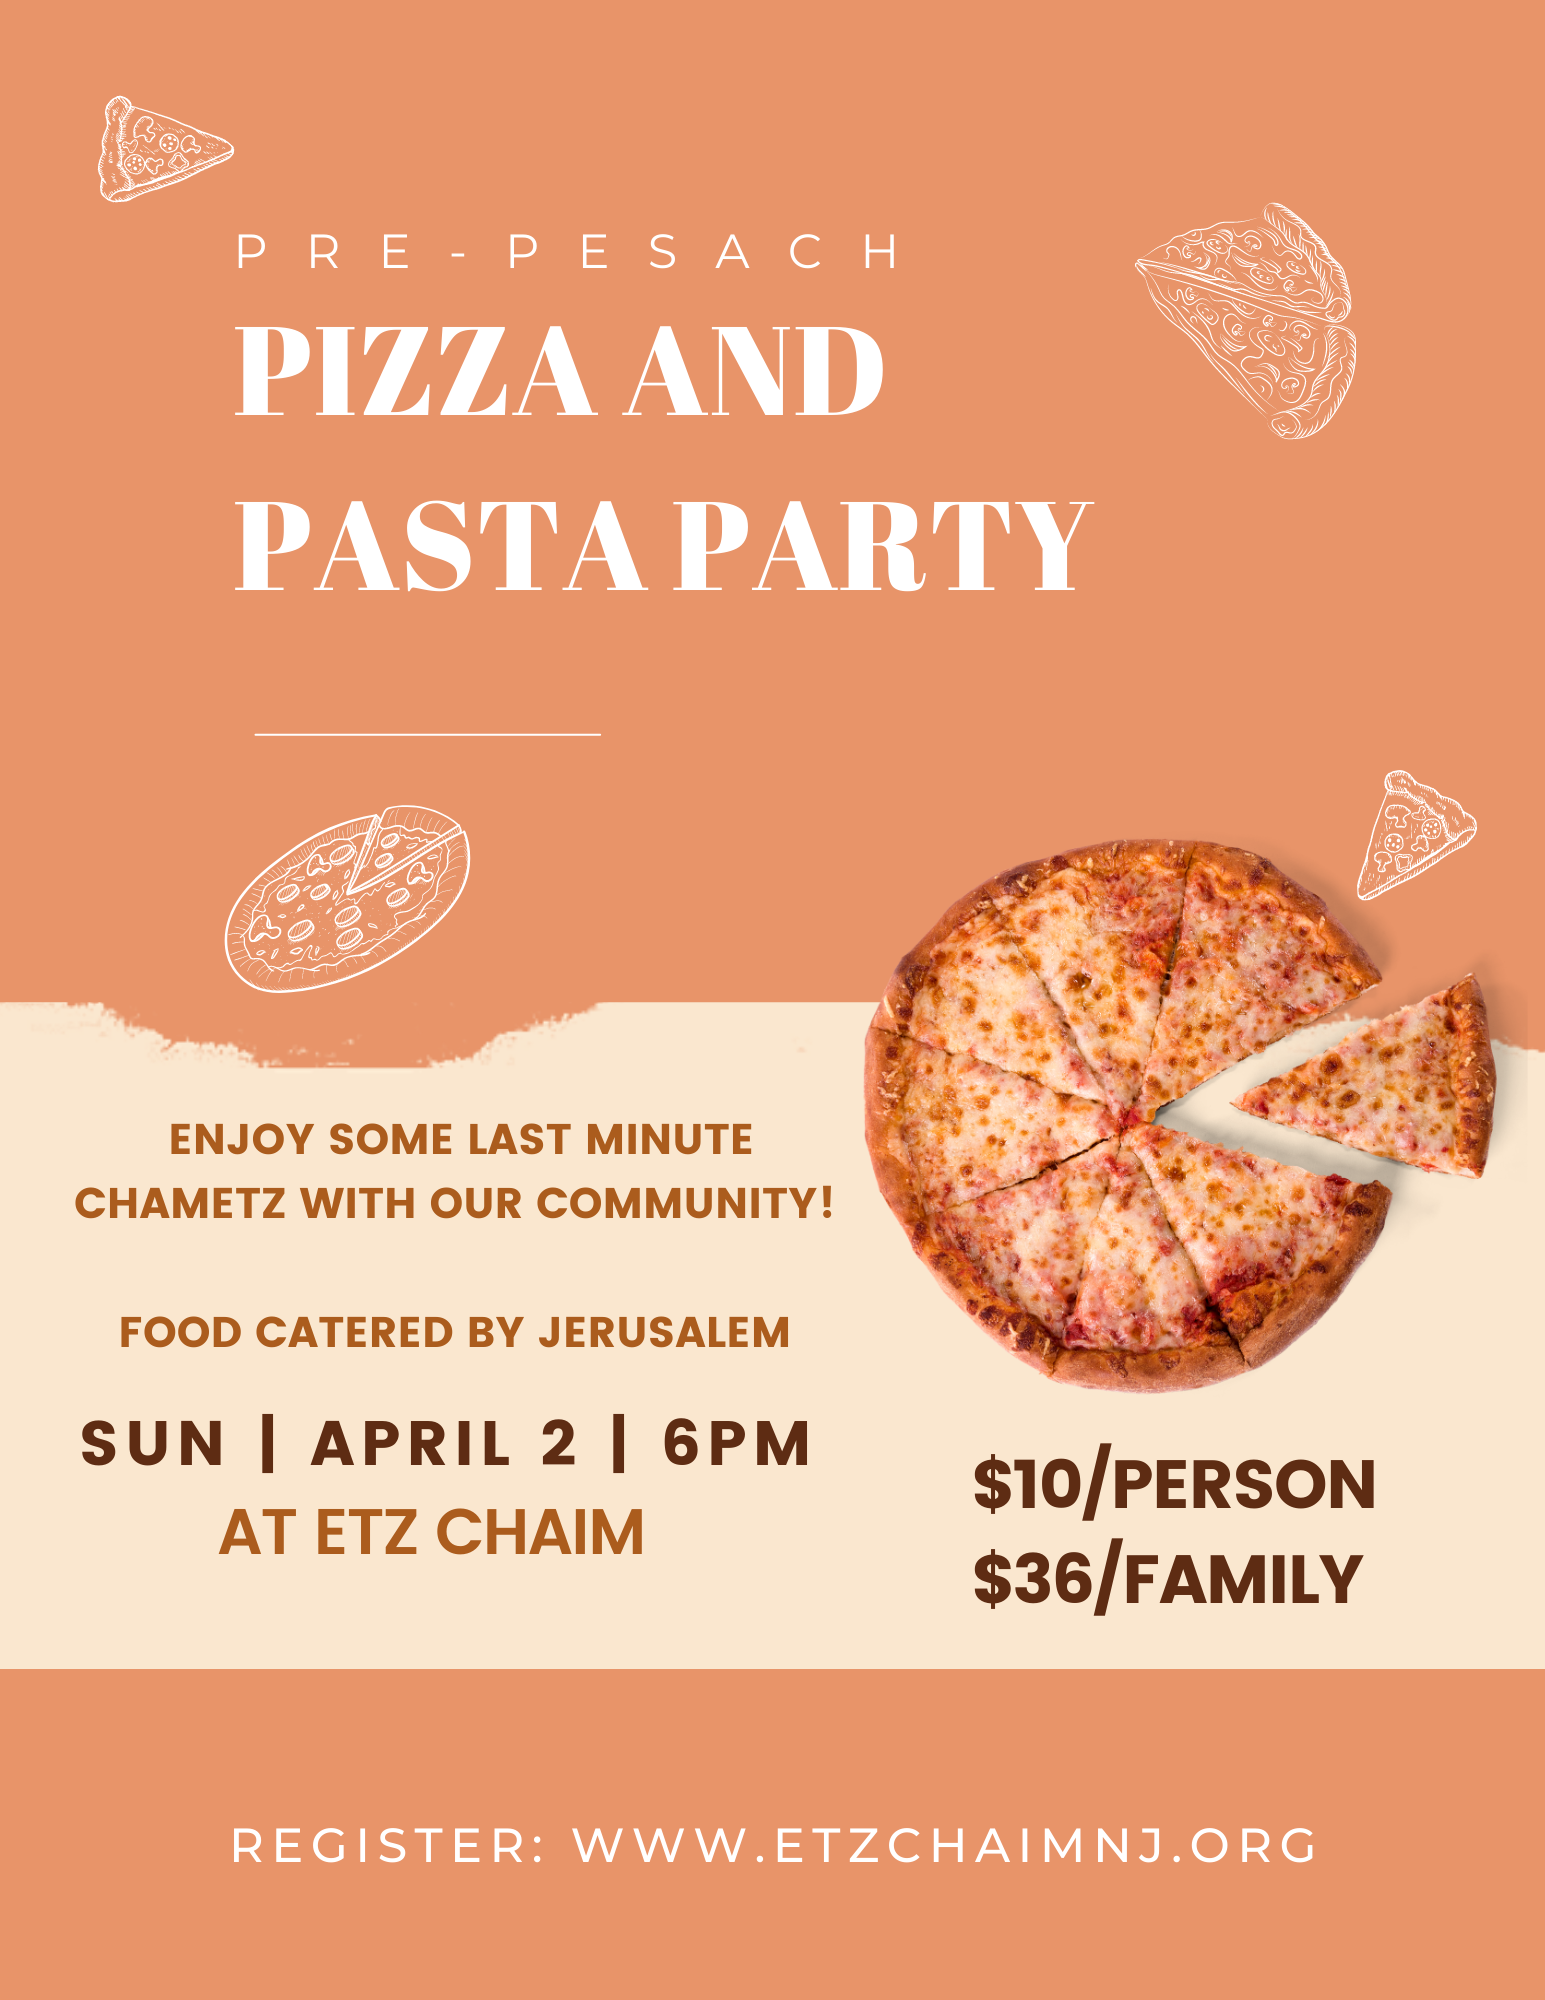 Pre-Pesach Pizza and Pasta Party!